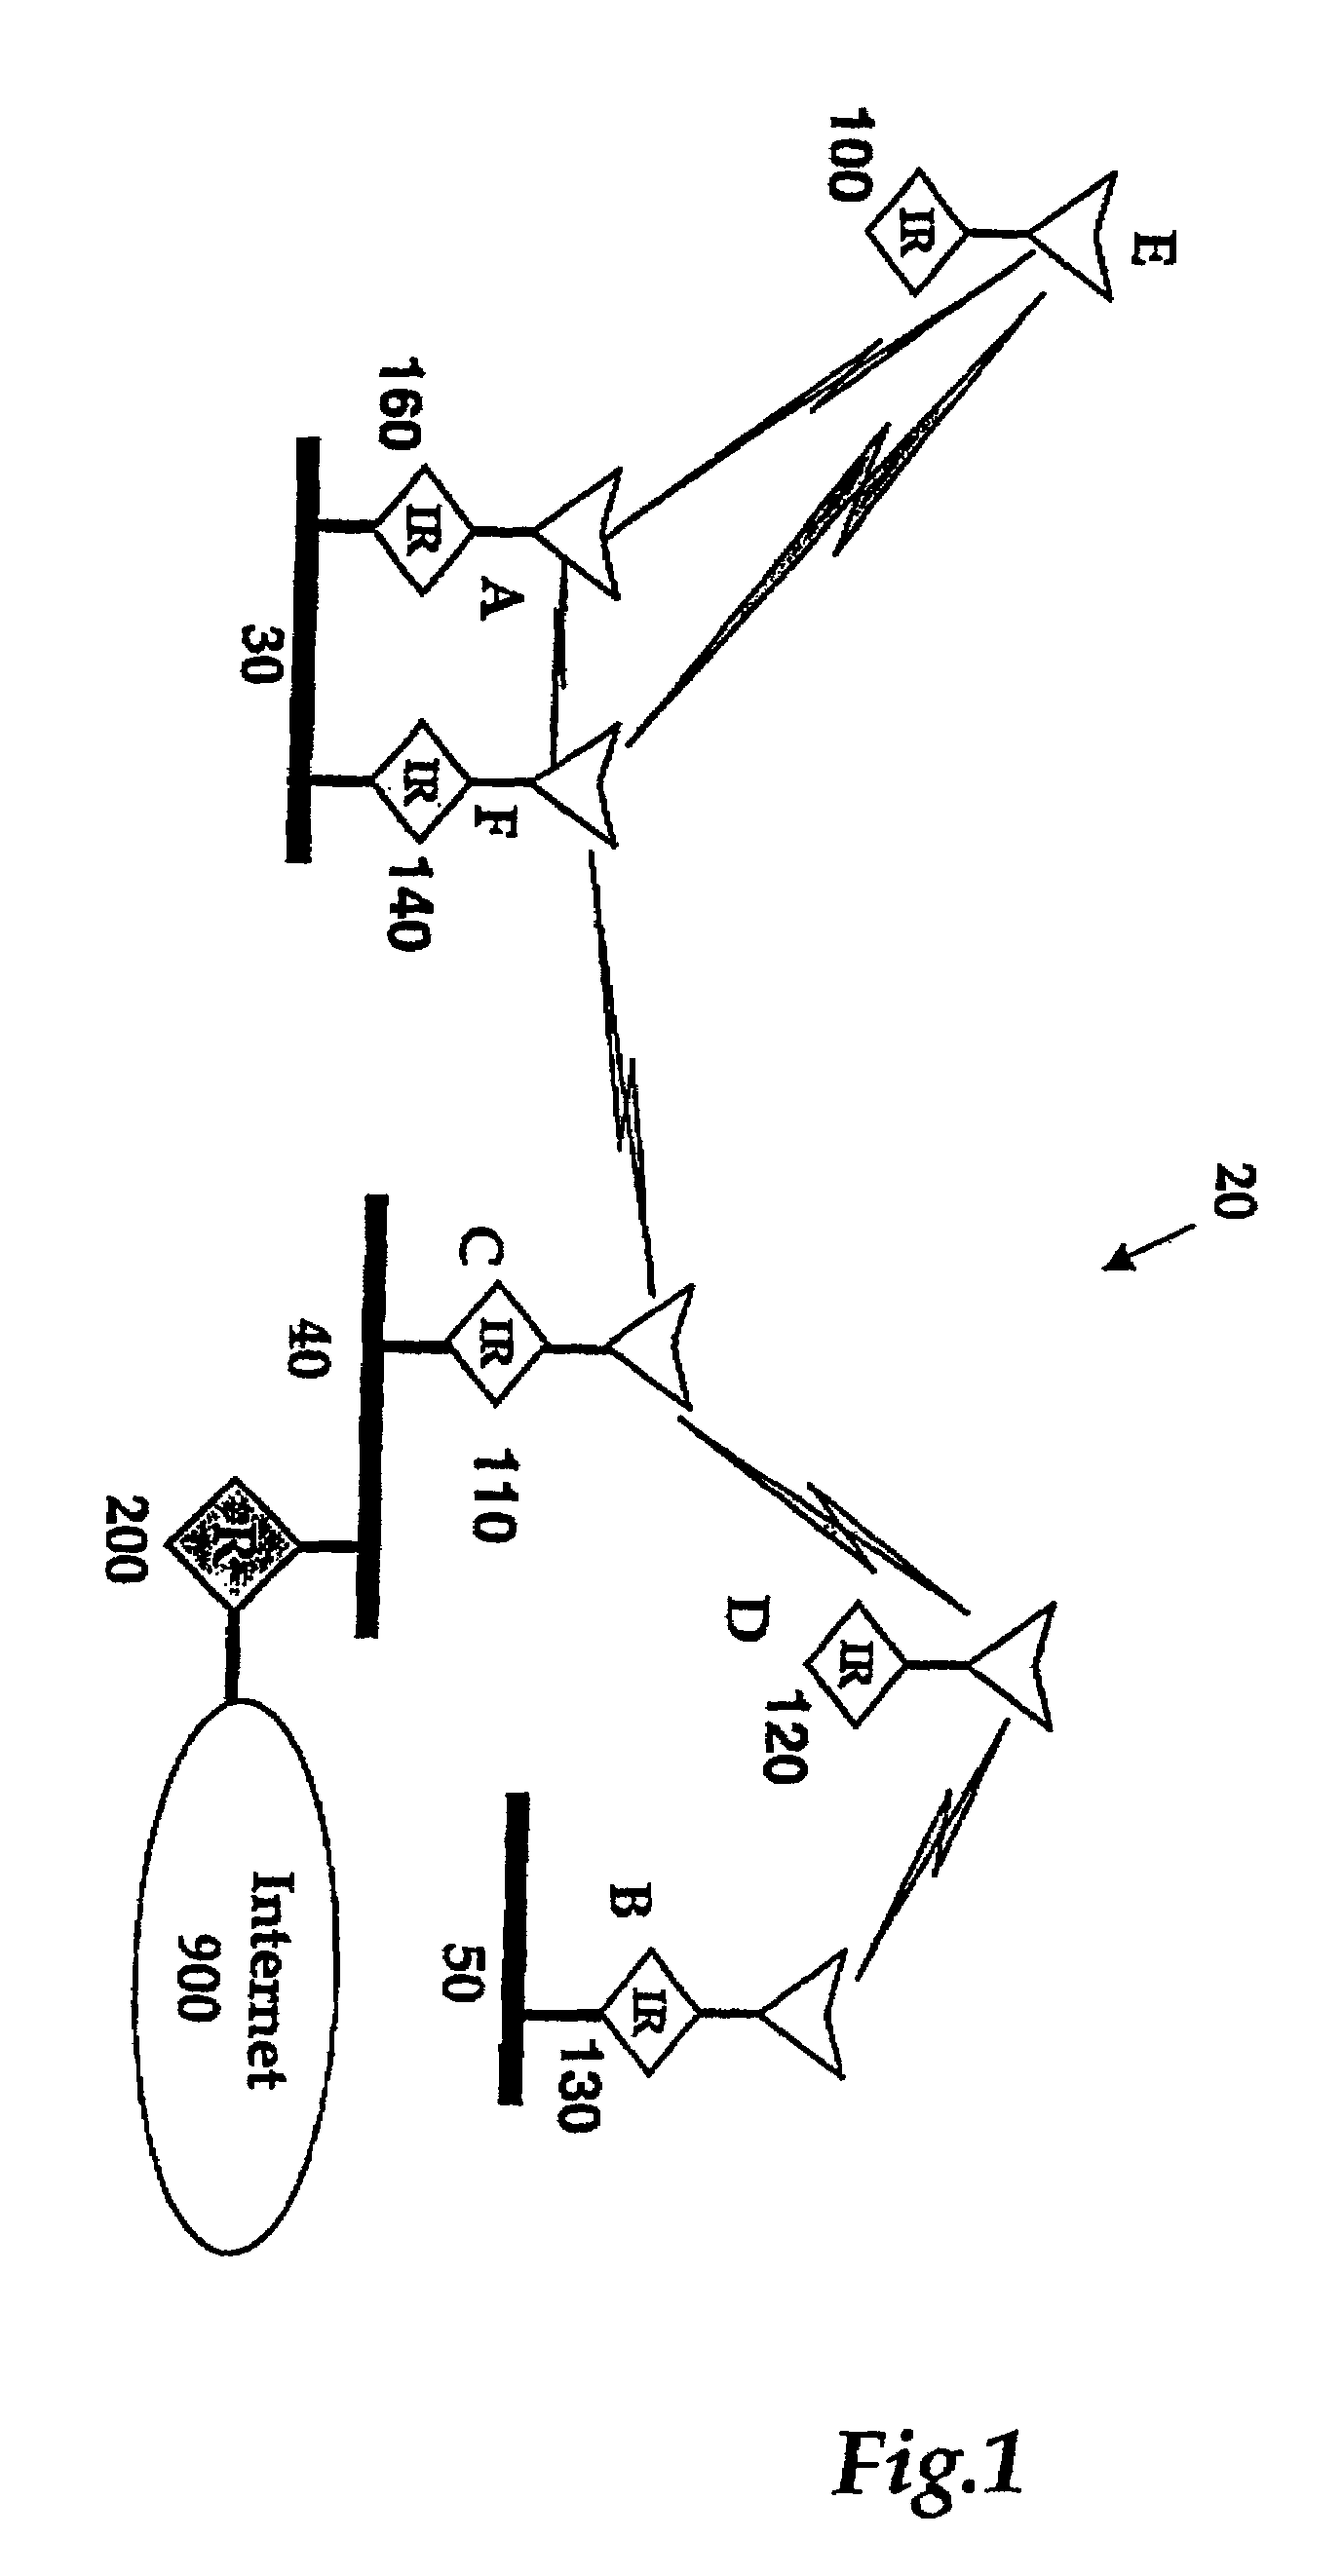 System and method for transmission scheduling using network membership information and neighborhood information